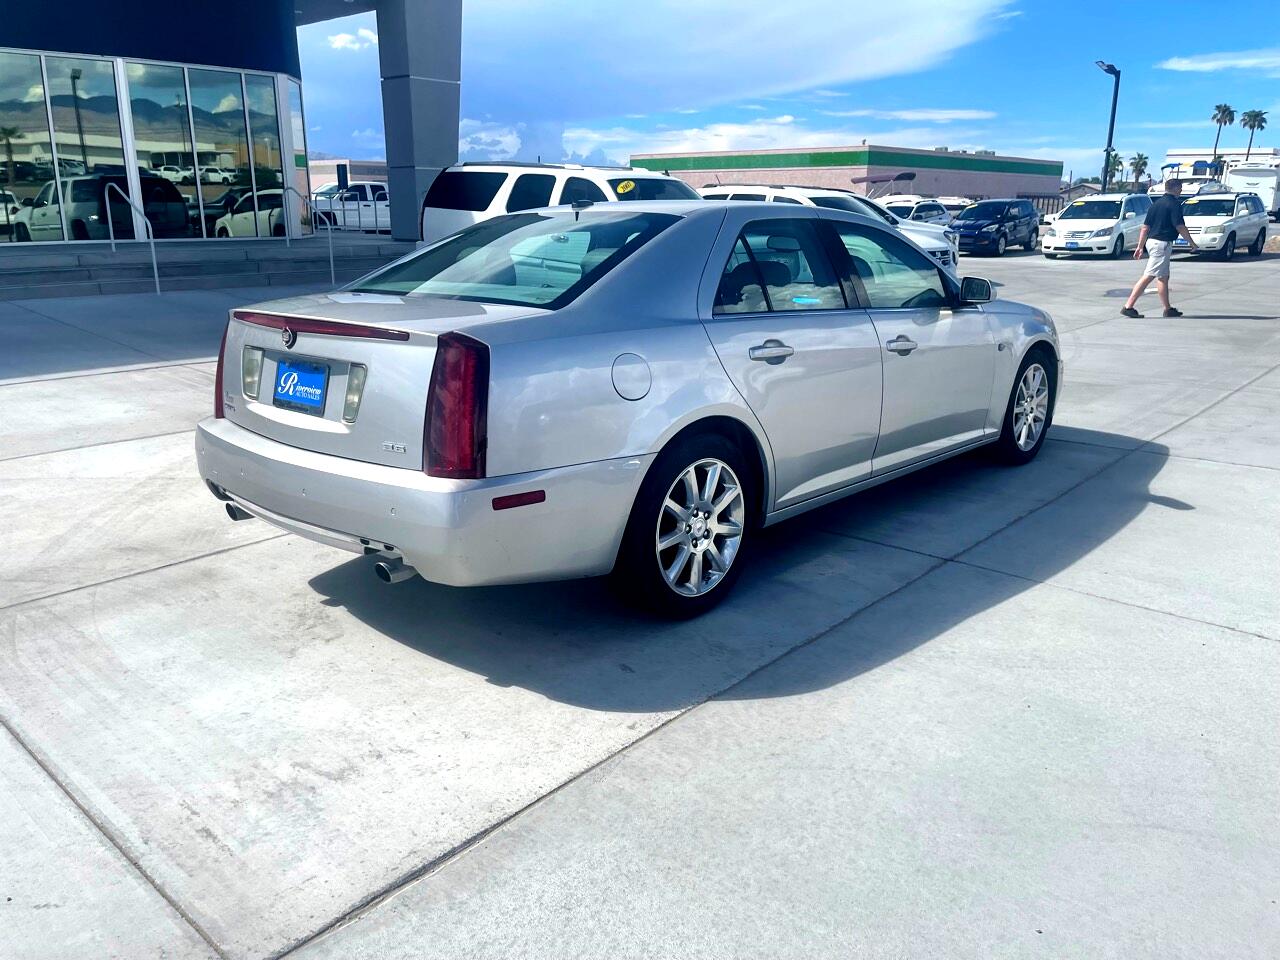 Used 2006 Cadillac STS  with VIN 1G6DW677560181940 for sale in Havasu City, AZ